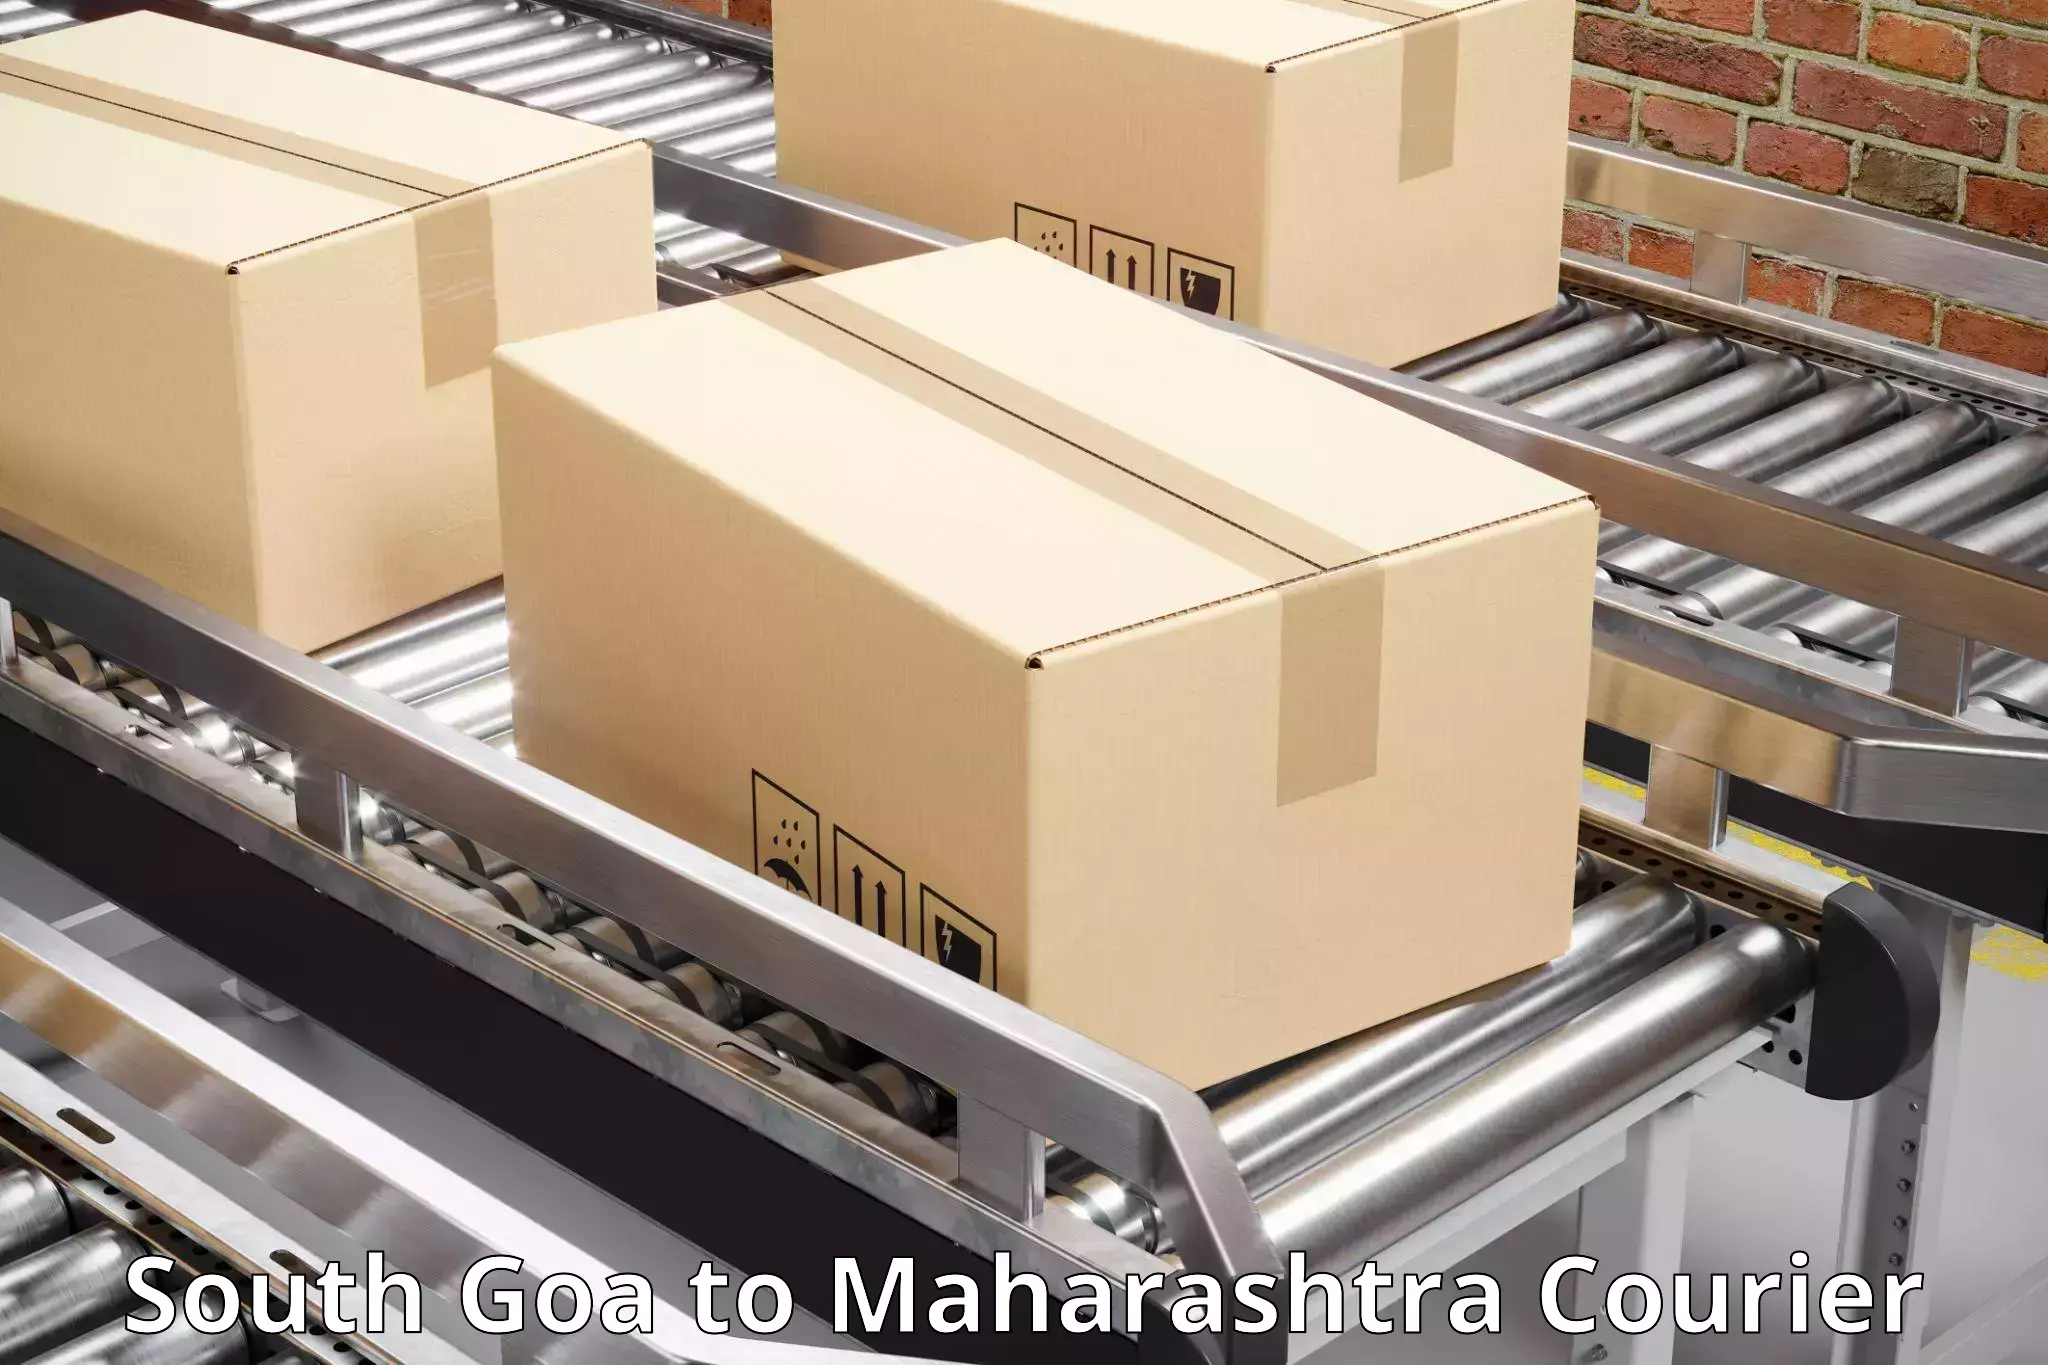 Quality courier services in South Goa to Ahmednagar